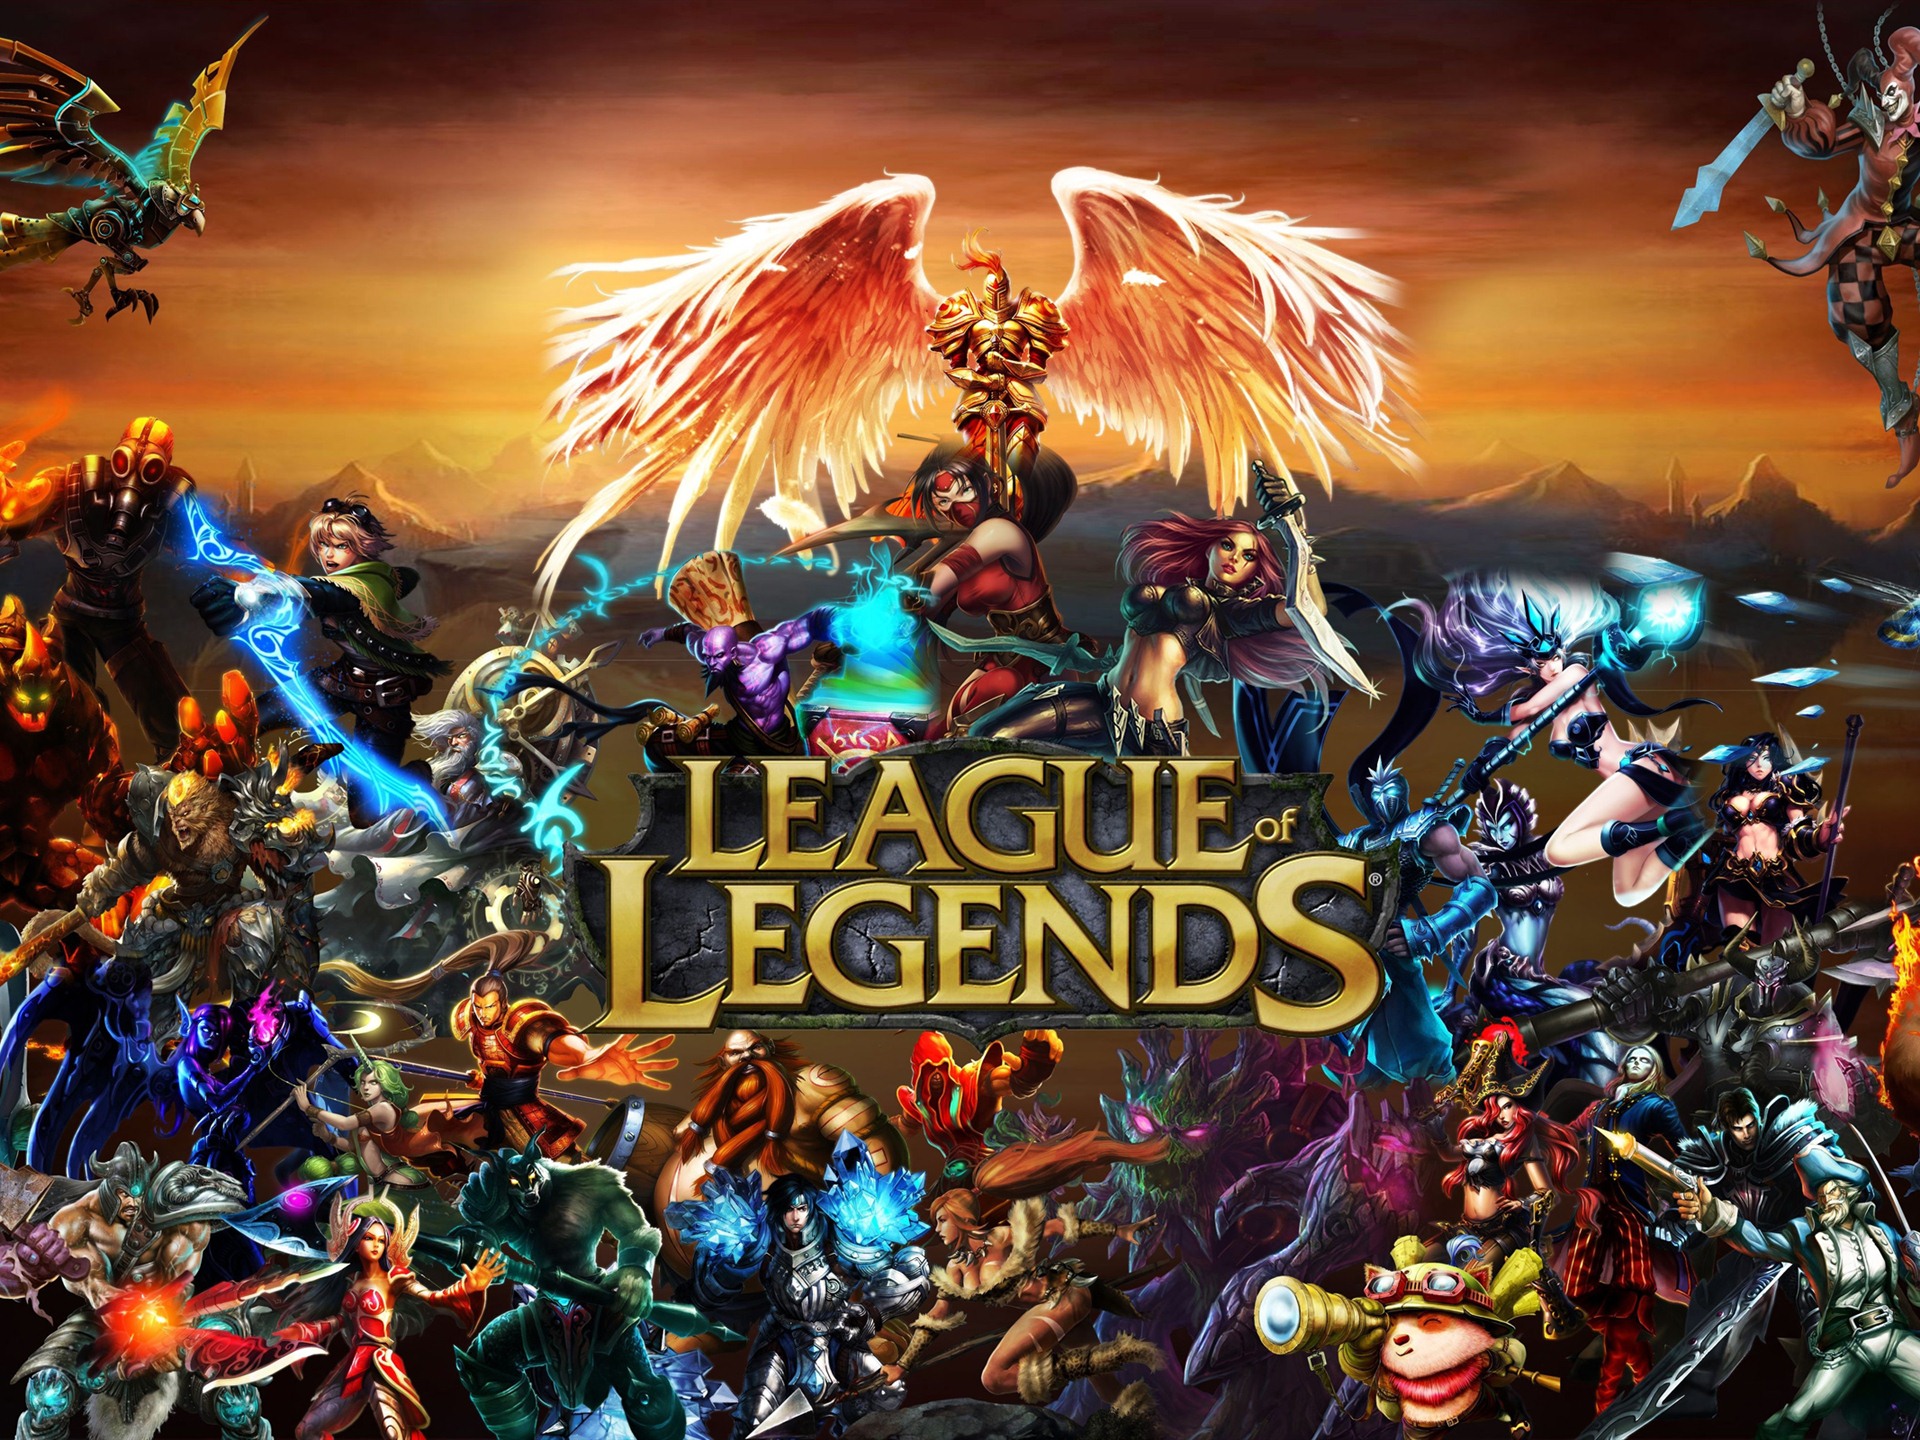 League of Legends game HD wallpapers #1 - 1920x1440